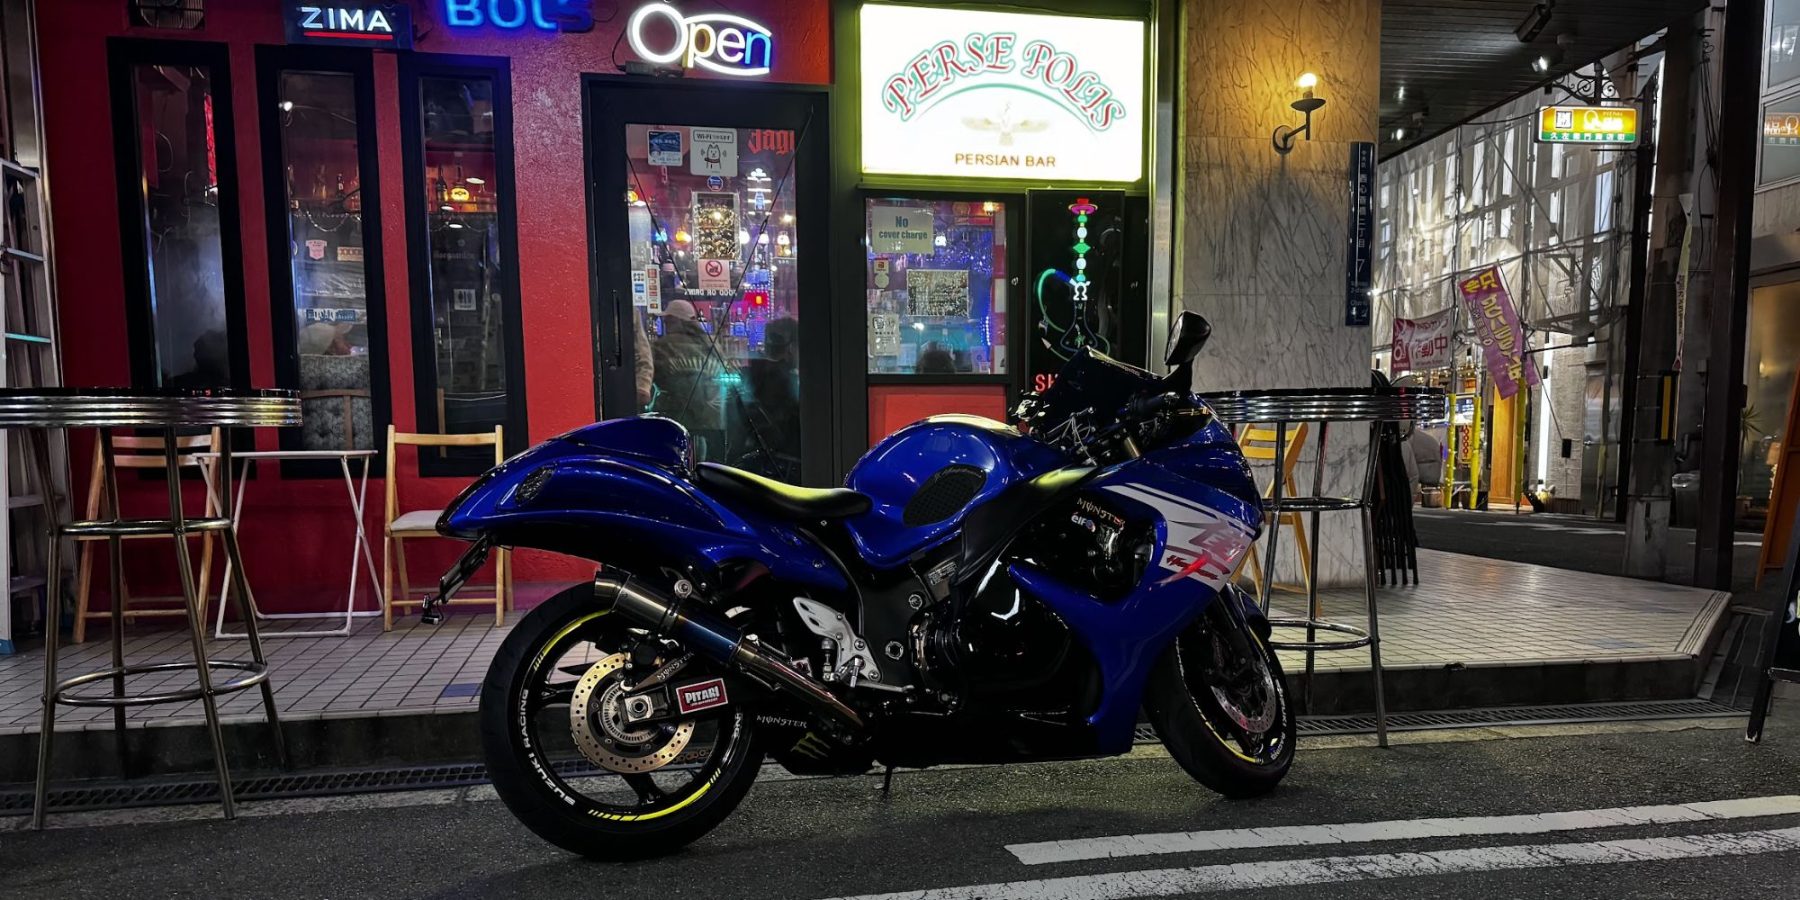 Hayabusa motorcycle in front of a bar in Osaka